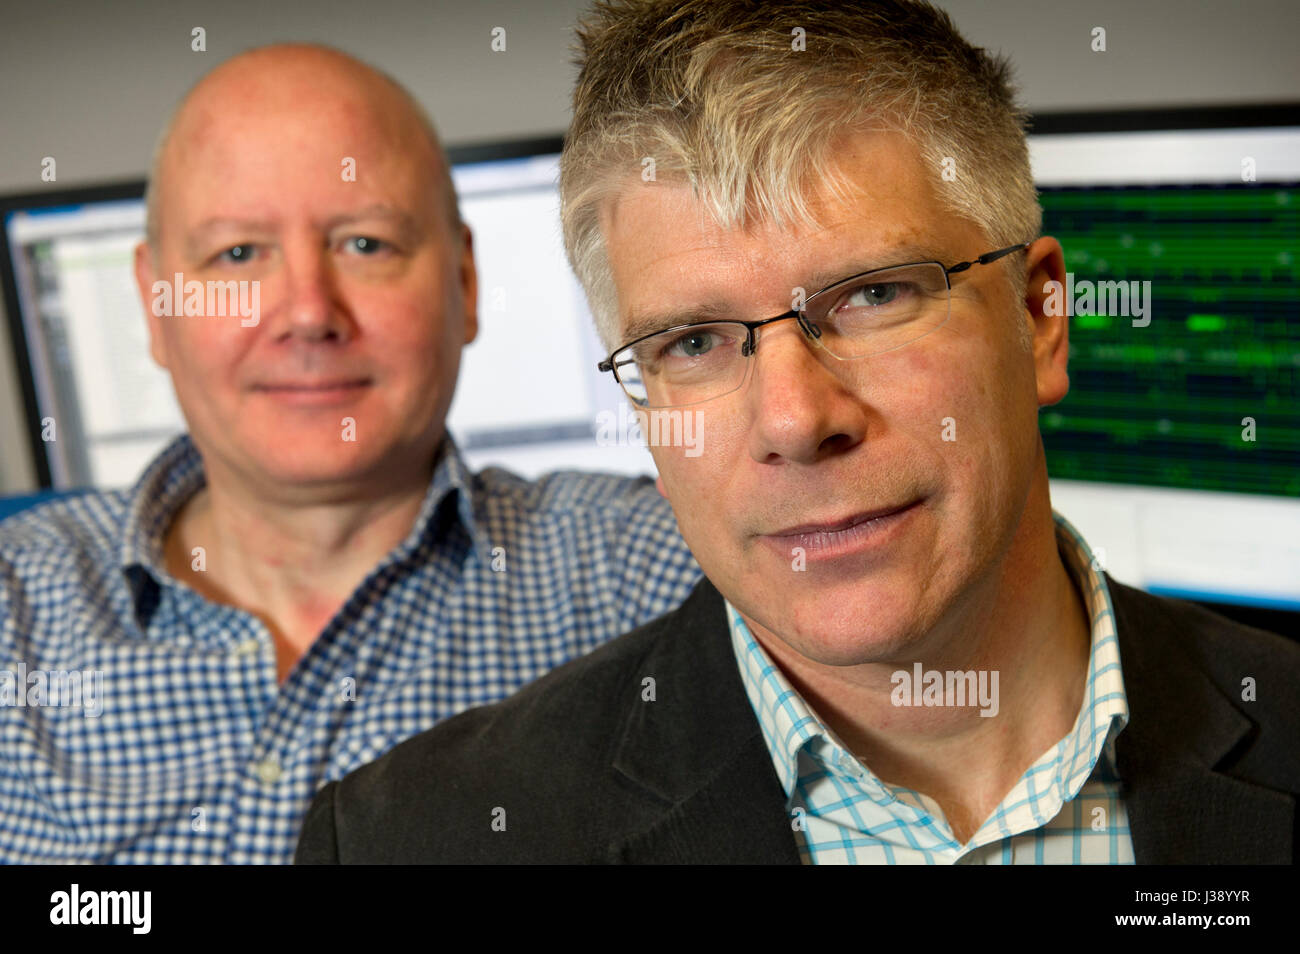 BluWireless Technology Ltd, with Henry Nurser (CEO) in jacket and Ray McConnell (CTO) in shirtsleeves Stock Photo